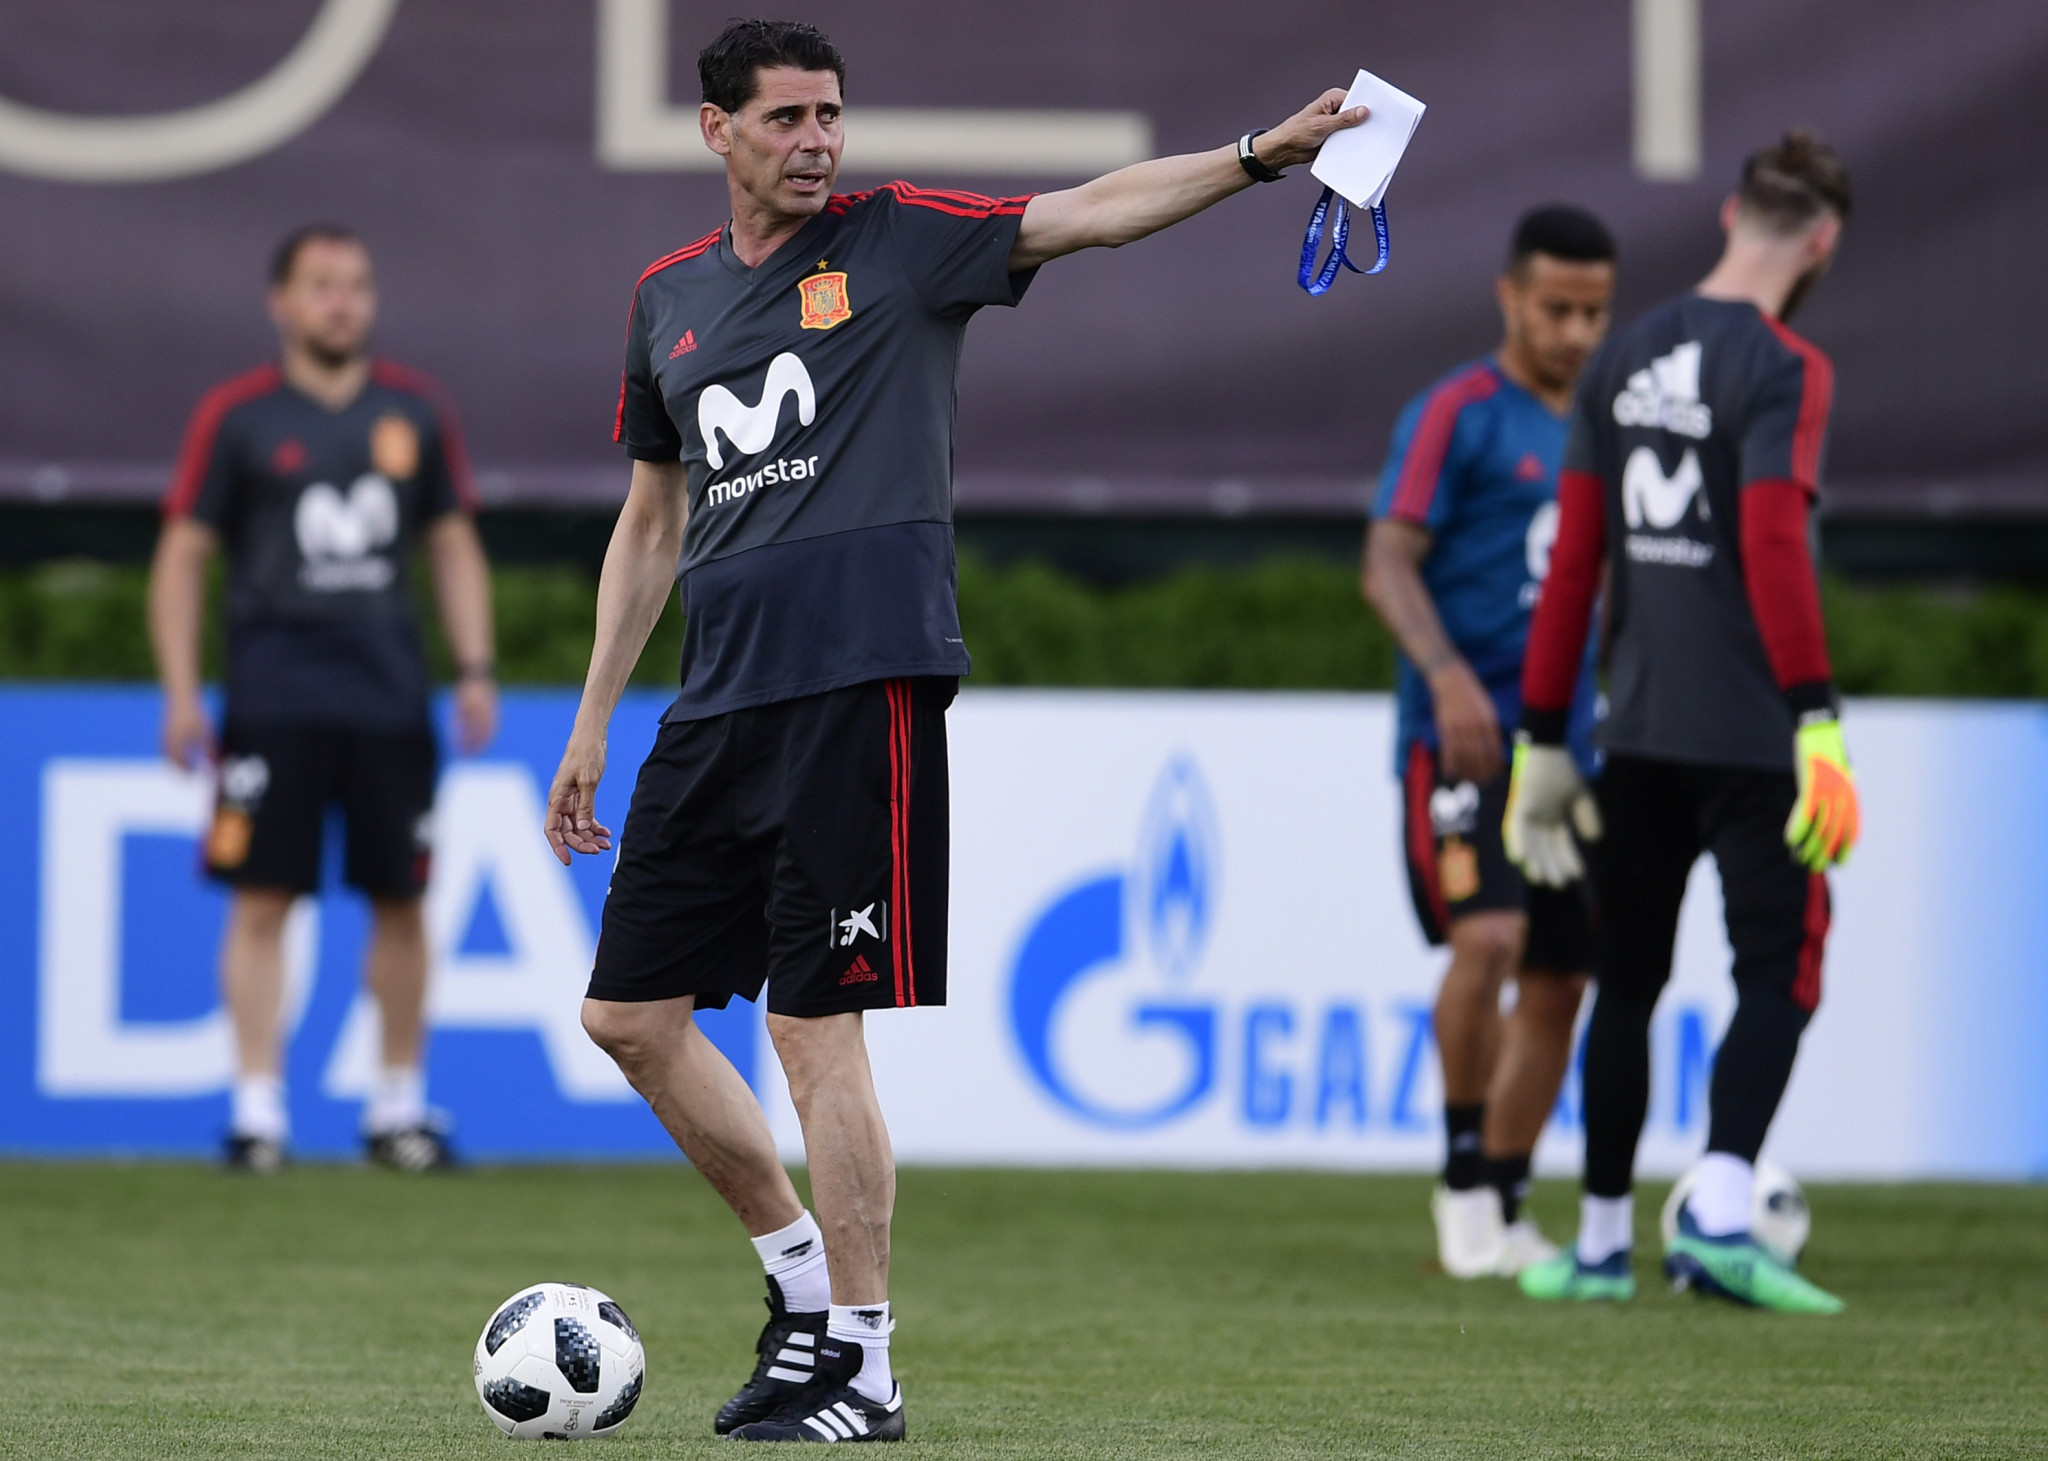 Stand-in coach Fernando Hierro directs training as Spain's players prepare for their opening World Cup match against Portugal in Sochi tomorrow ©Getty Images  